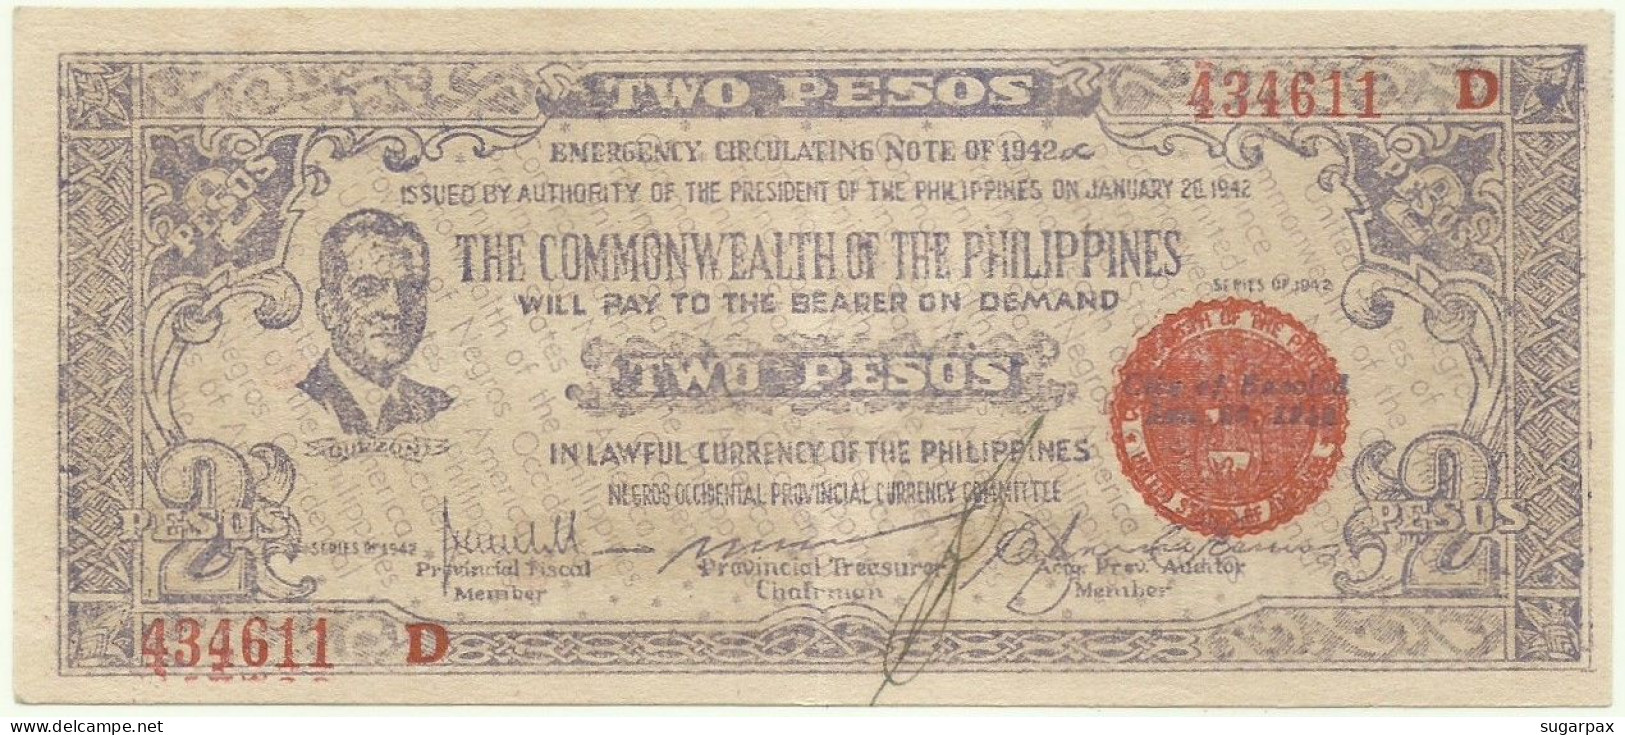 PHILIPPINES - 2 Pesos - 1942 - Pick S 647B - Serie D - NEGROS Occidental Provincial Currency Committee - Filippine